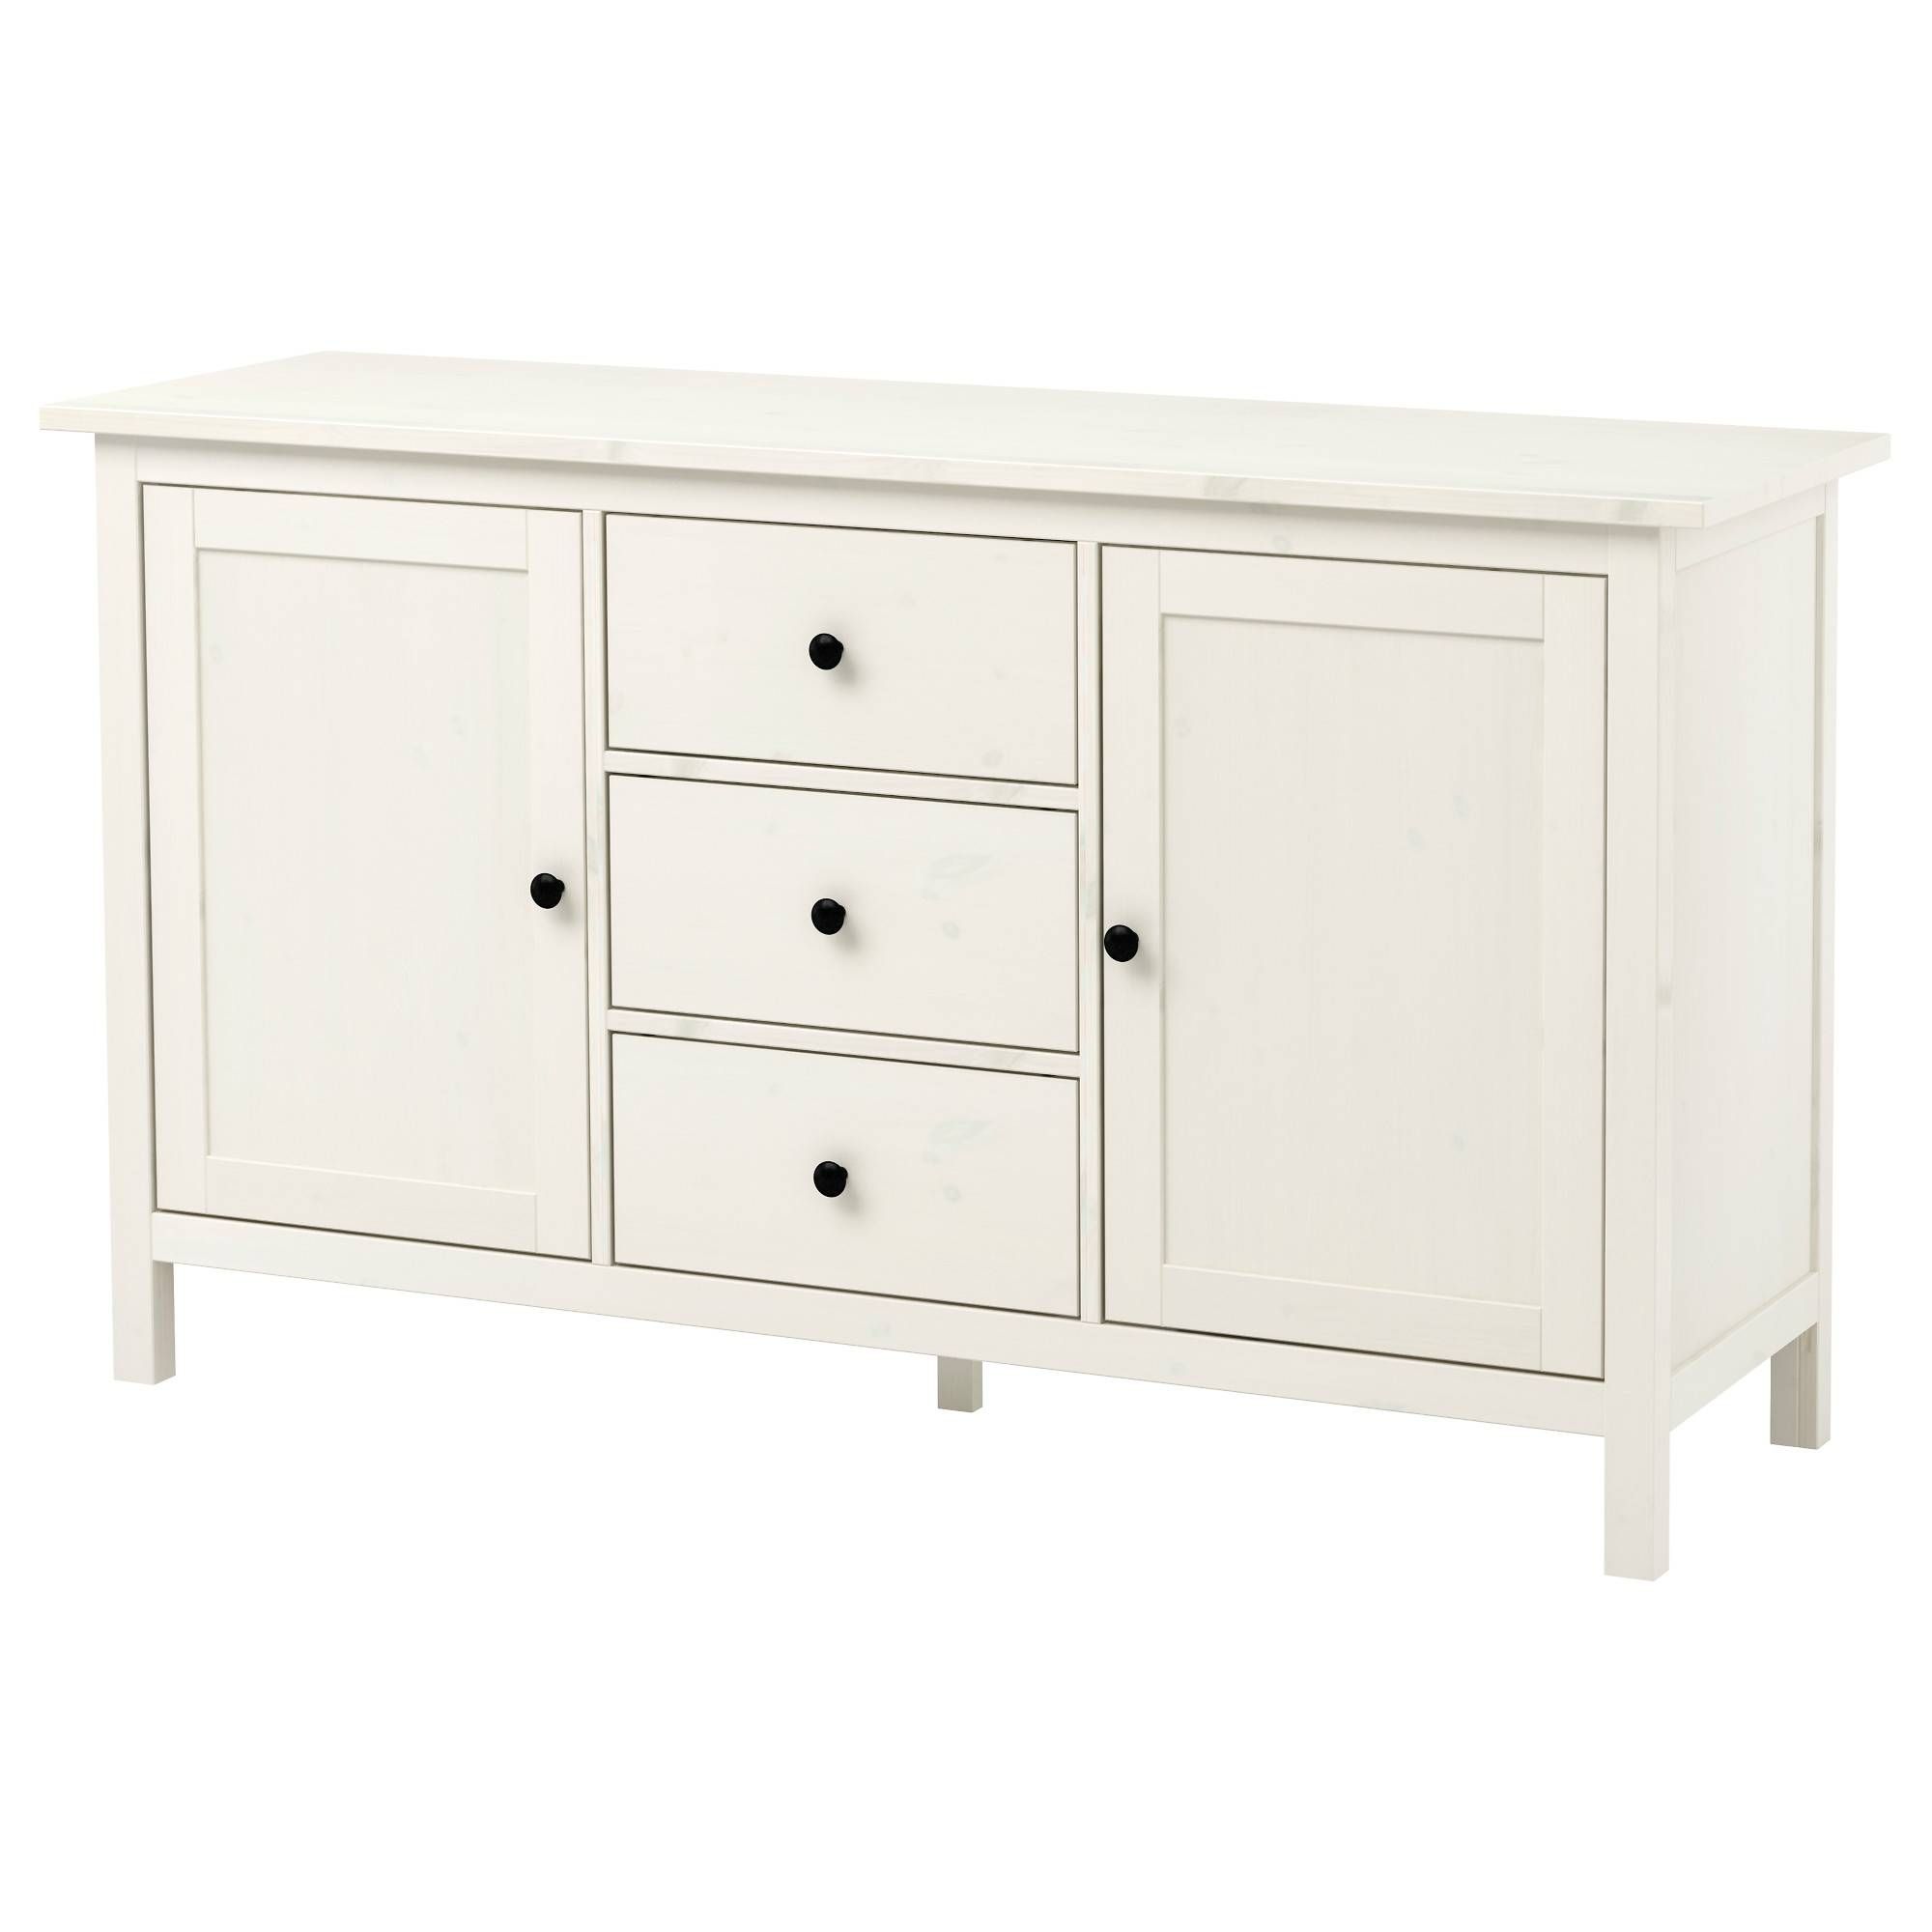 Hemnes Sideboard – White Stain – Ikea With Regard To Sideboards And Buffets Ikea (View 4 of 15)